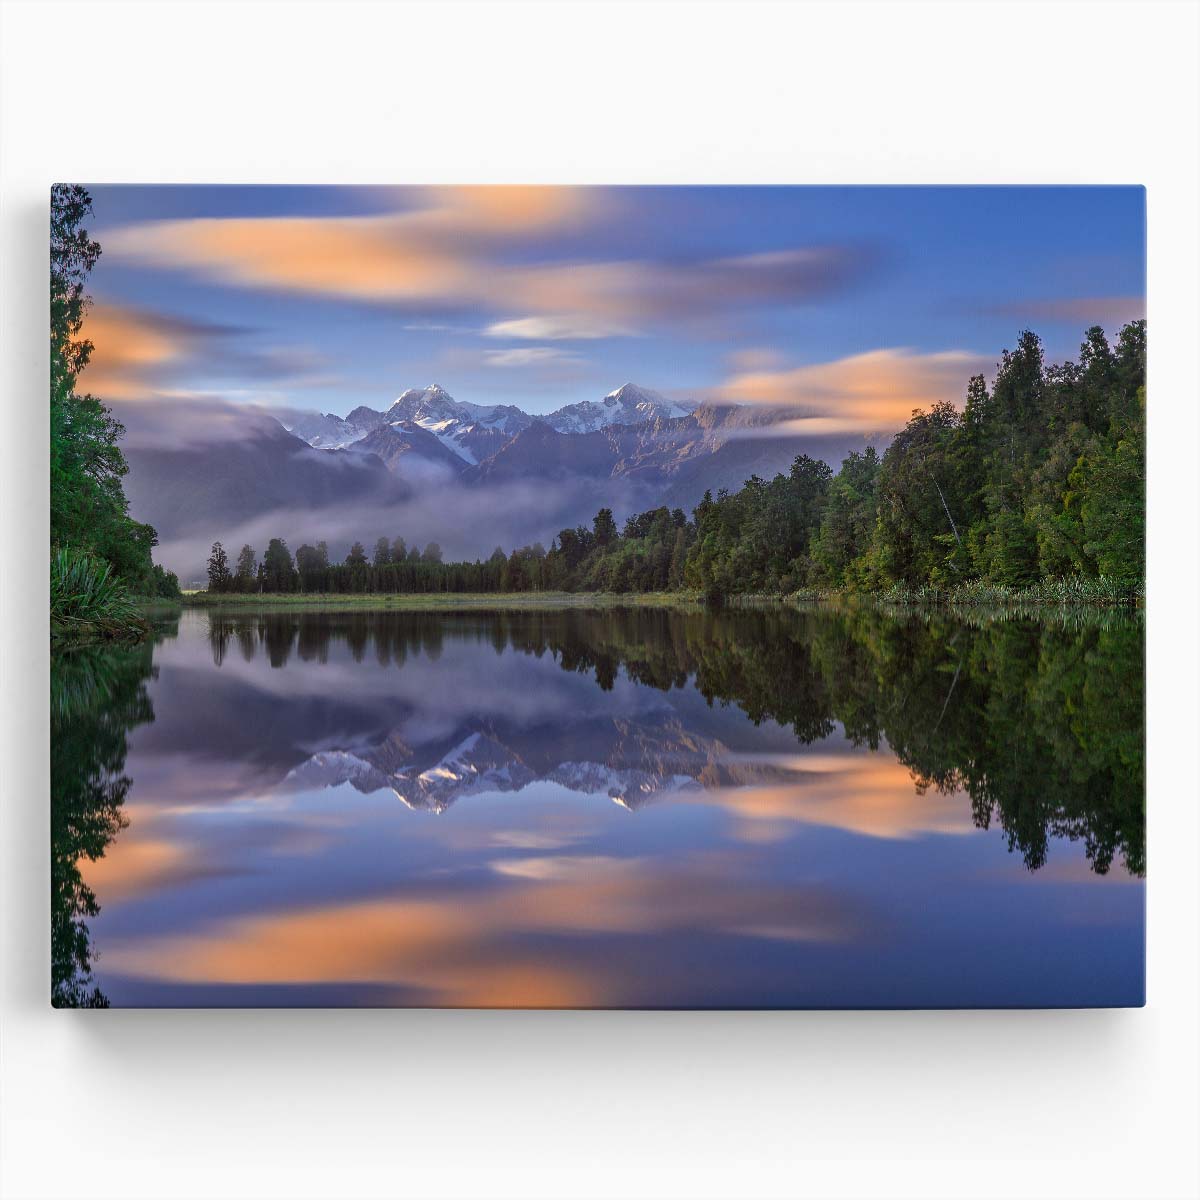 Sunrise at Lake Matheson Snowy Peaks Reflection Wall Art by Luxuriance Designs. Made in USA.